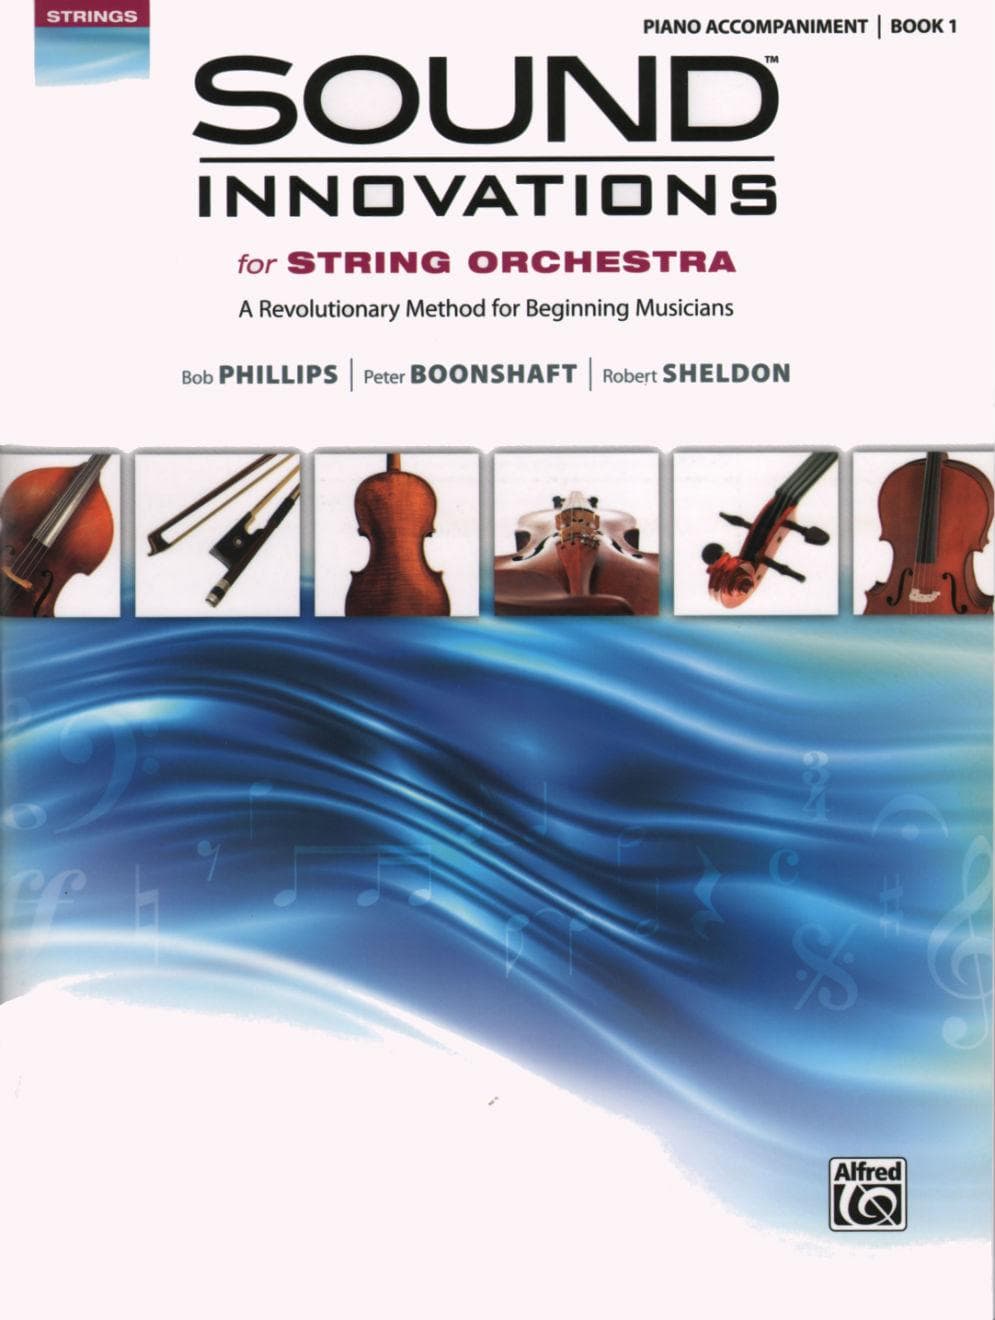 Sound Innovations - Book 1 Piano Accompaniment - by Bob Phillips and Kirk Moss - Alfred Publication